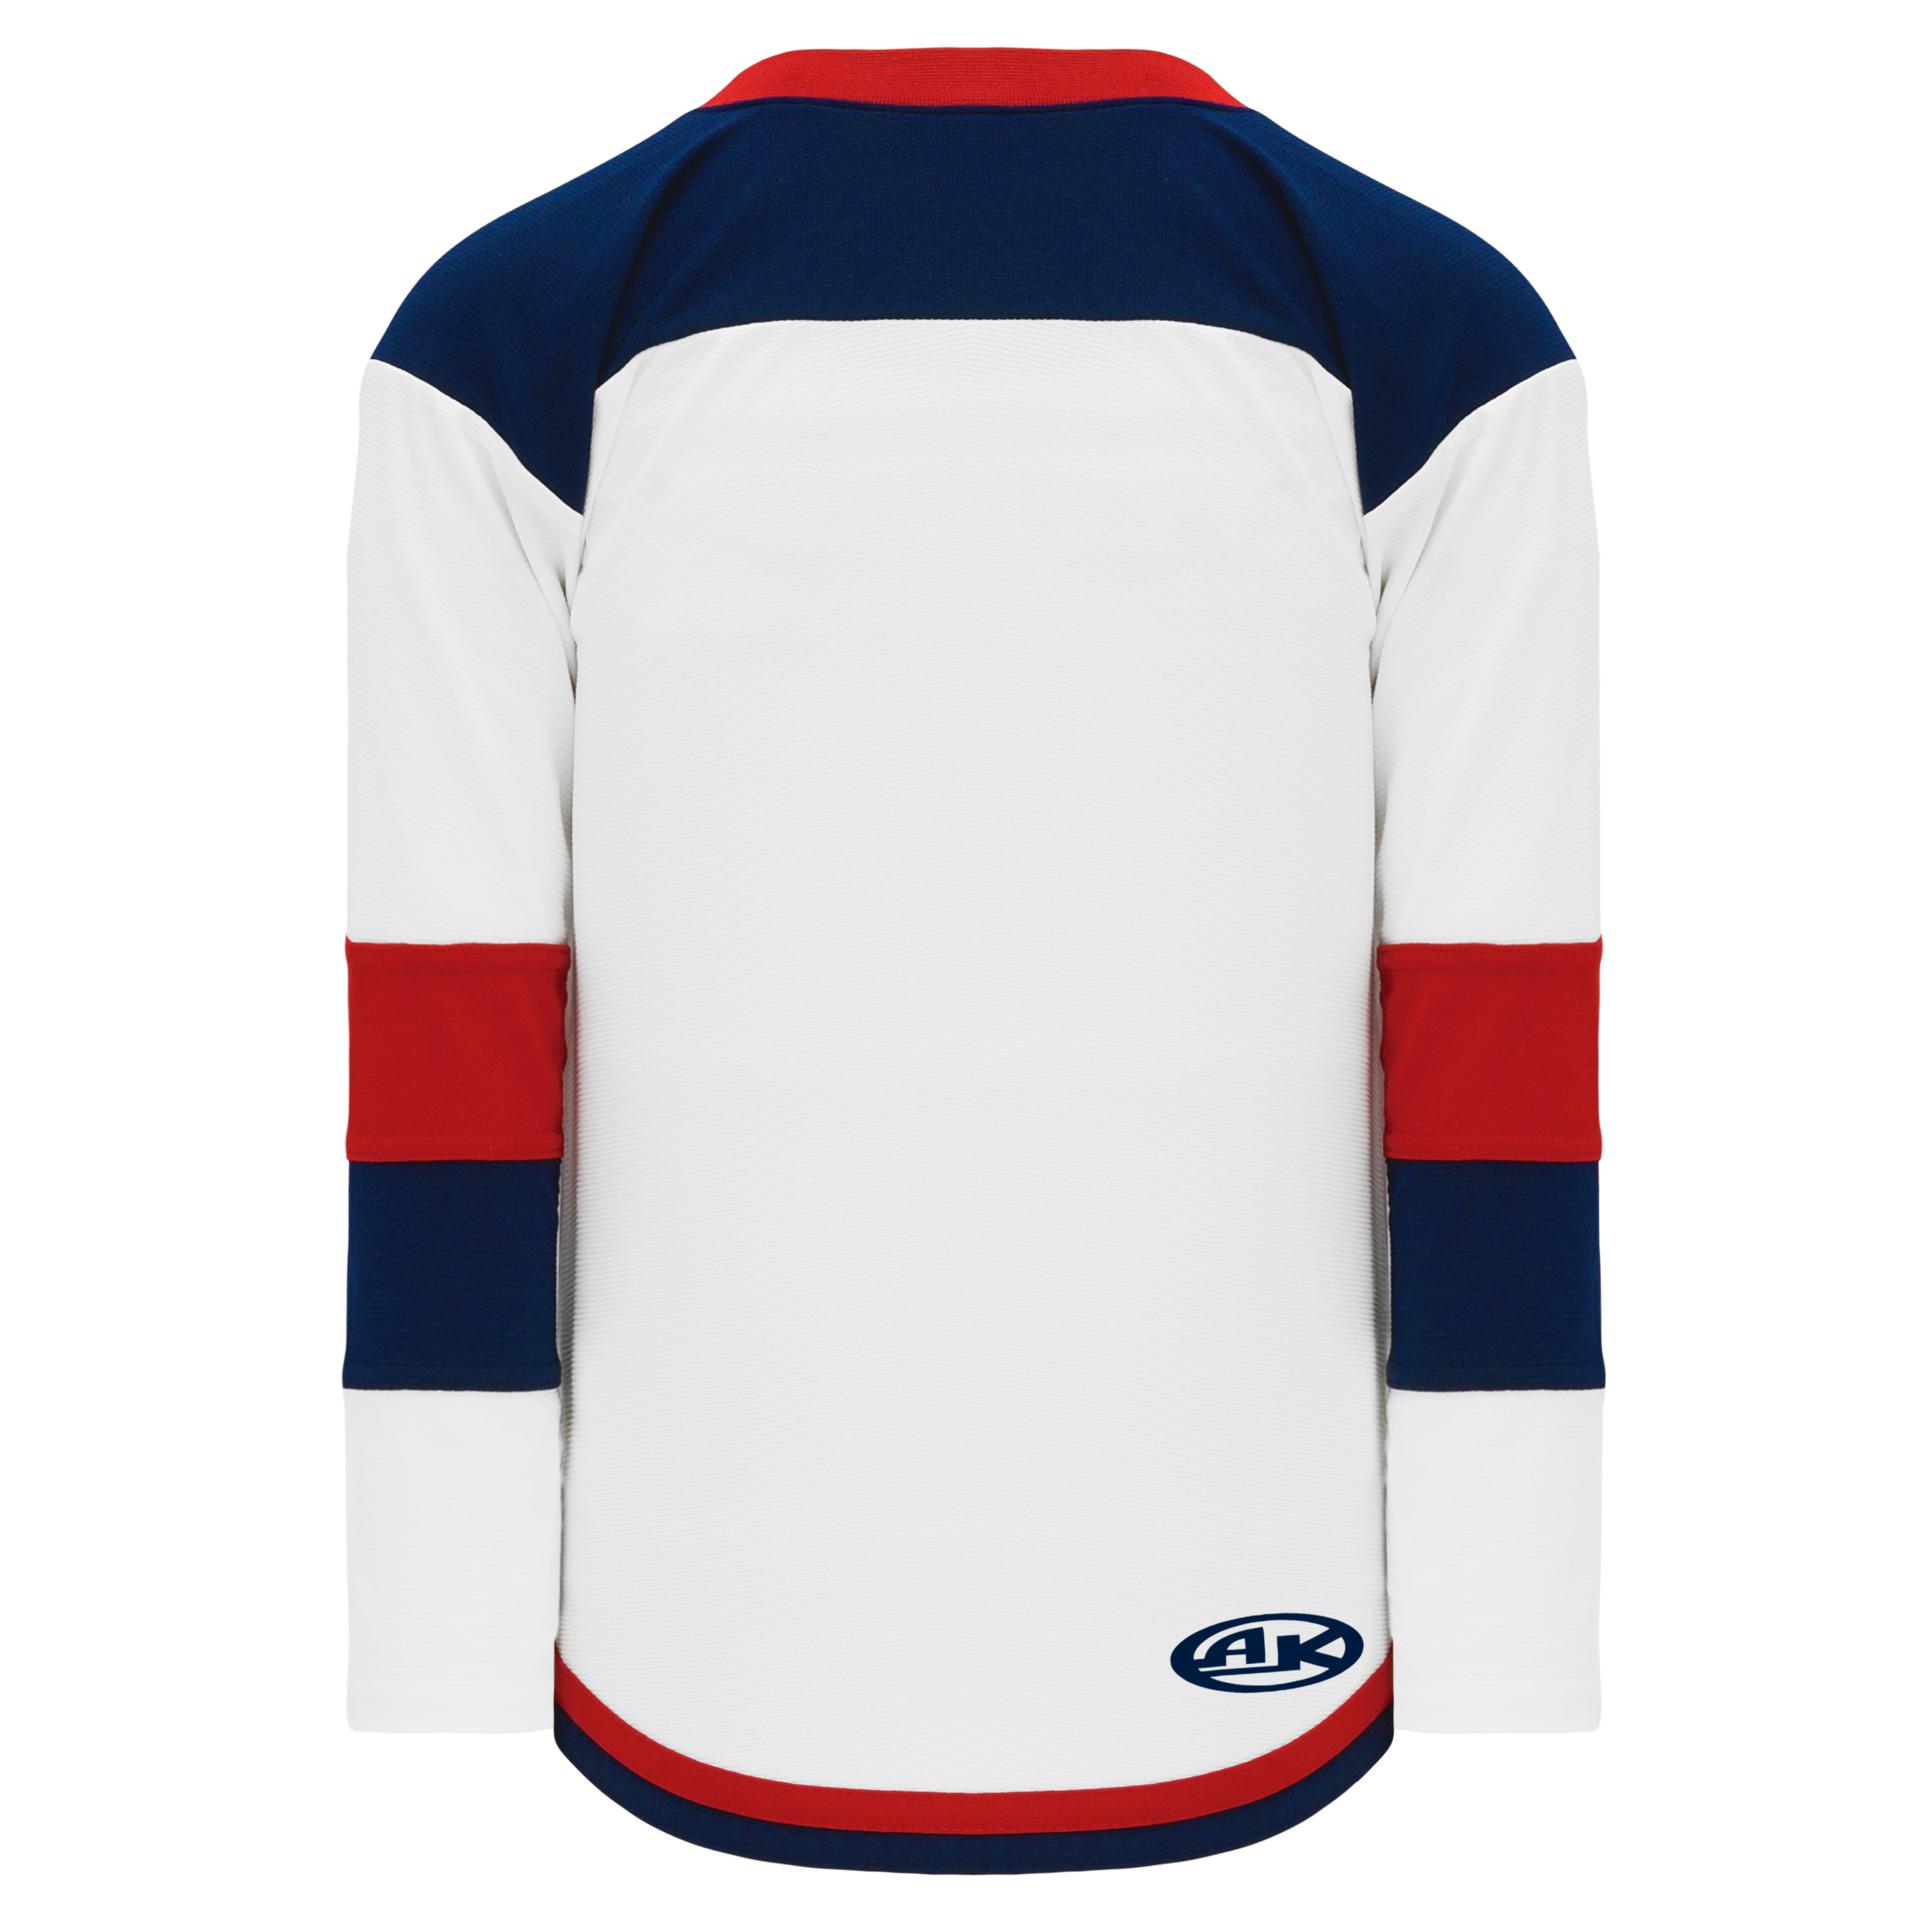 H7400-765 White/Navy/Red League Style Blank Hockey Jerseys Adult Small